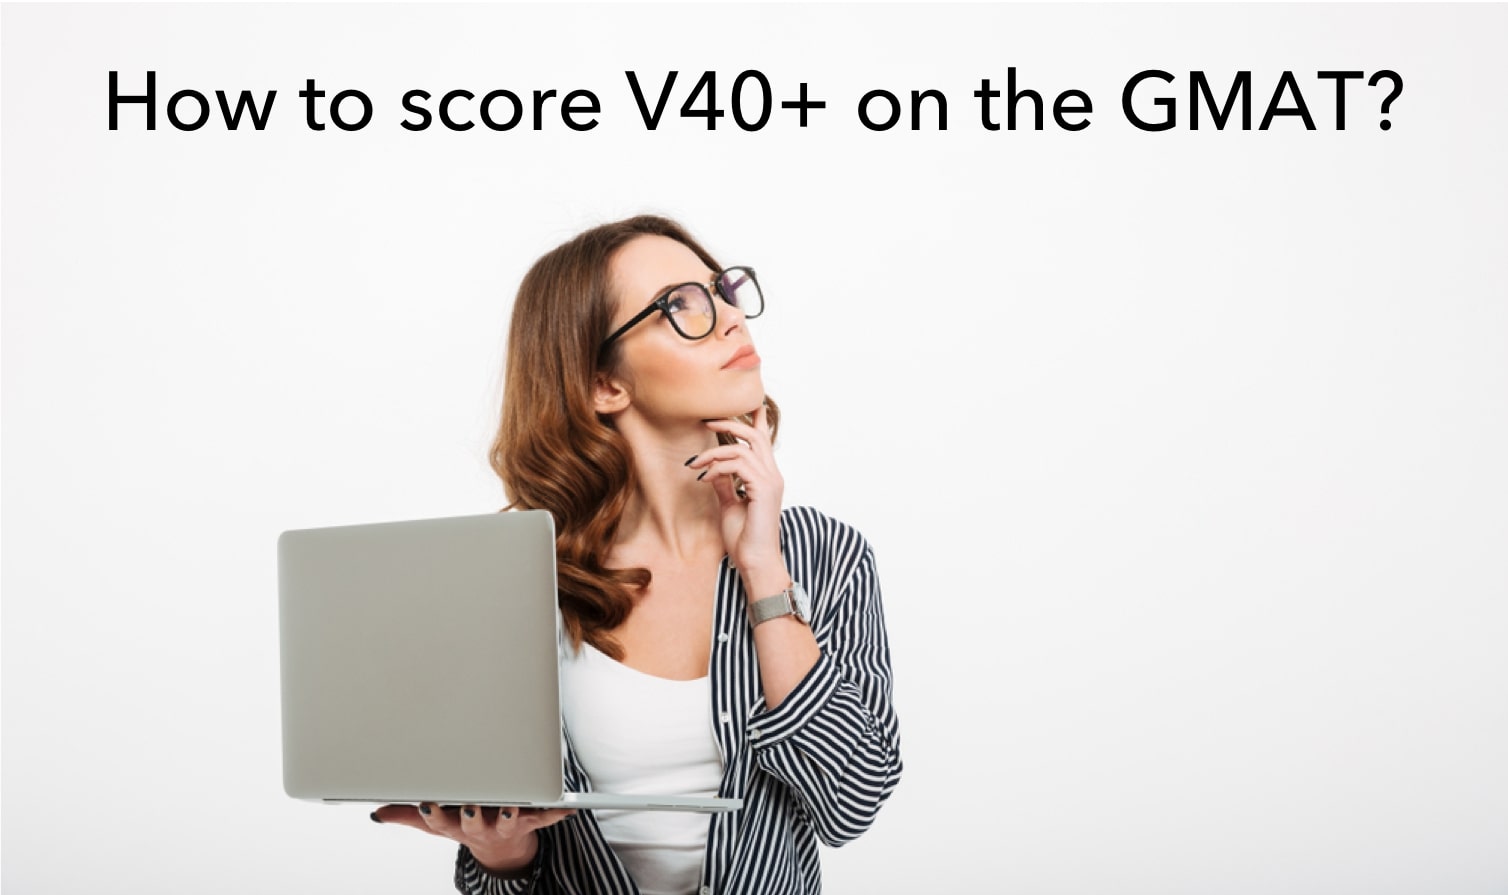 How to score above V40 – Tips from V40+ scorers